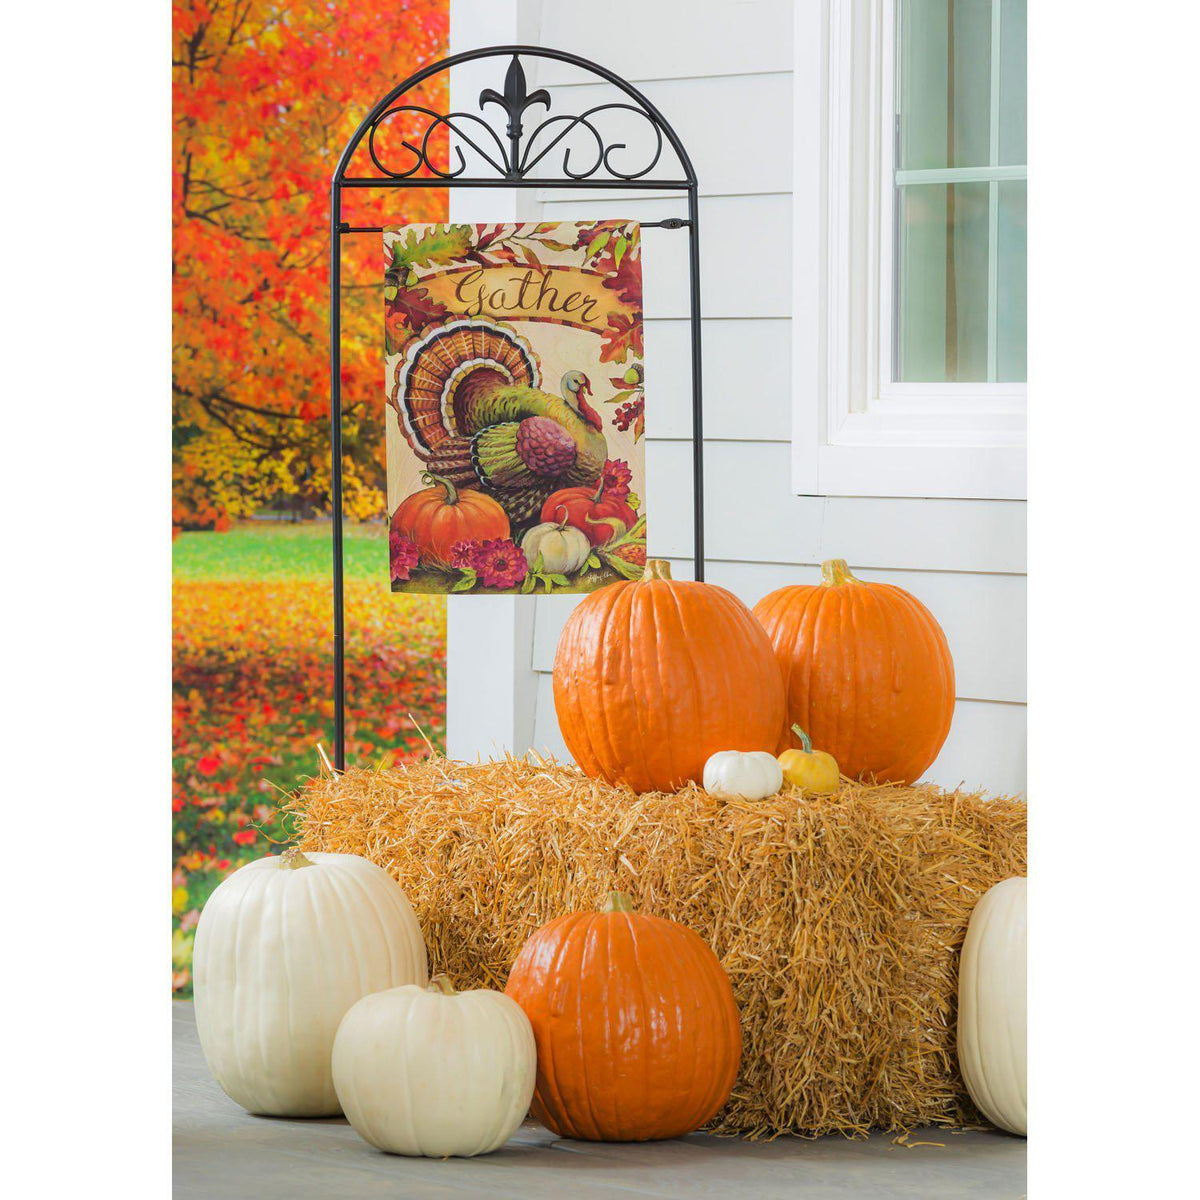 The Warm Gathering Turkey garden flag features a turkey resting among pumpkins and the word "Gather" surrounded by fall leaves. 